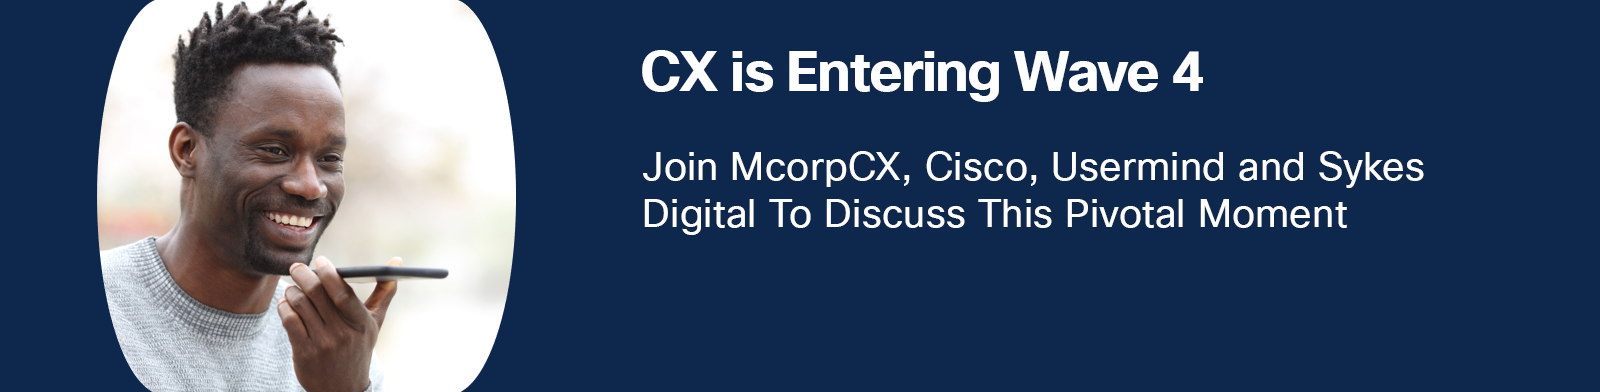 CX - Wave 4 Webinar: Join McorpCX, Cisco, Usermind and Sykes Digital To Discuss This Pivotal Moment